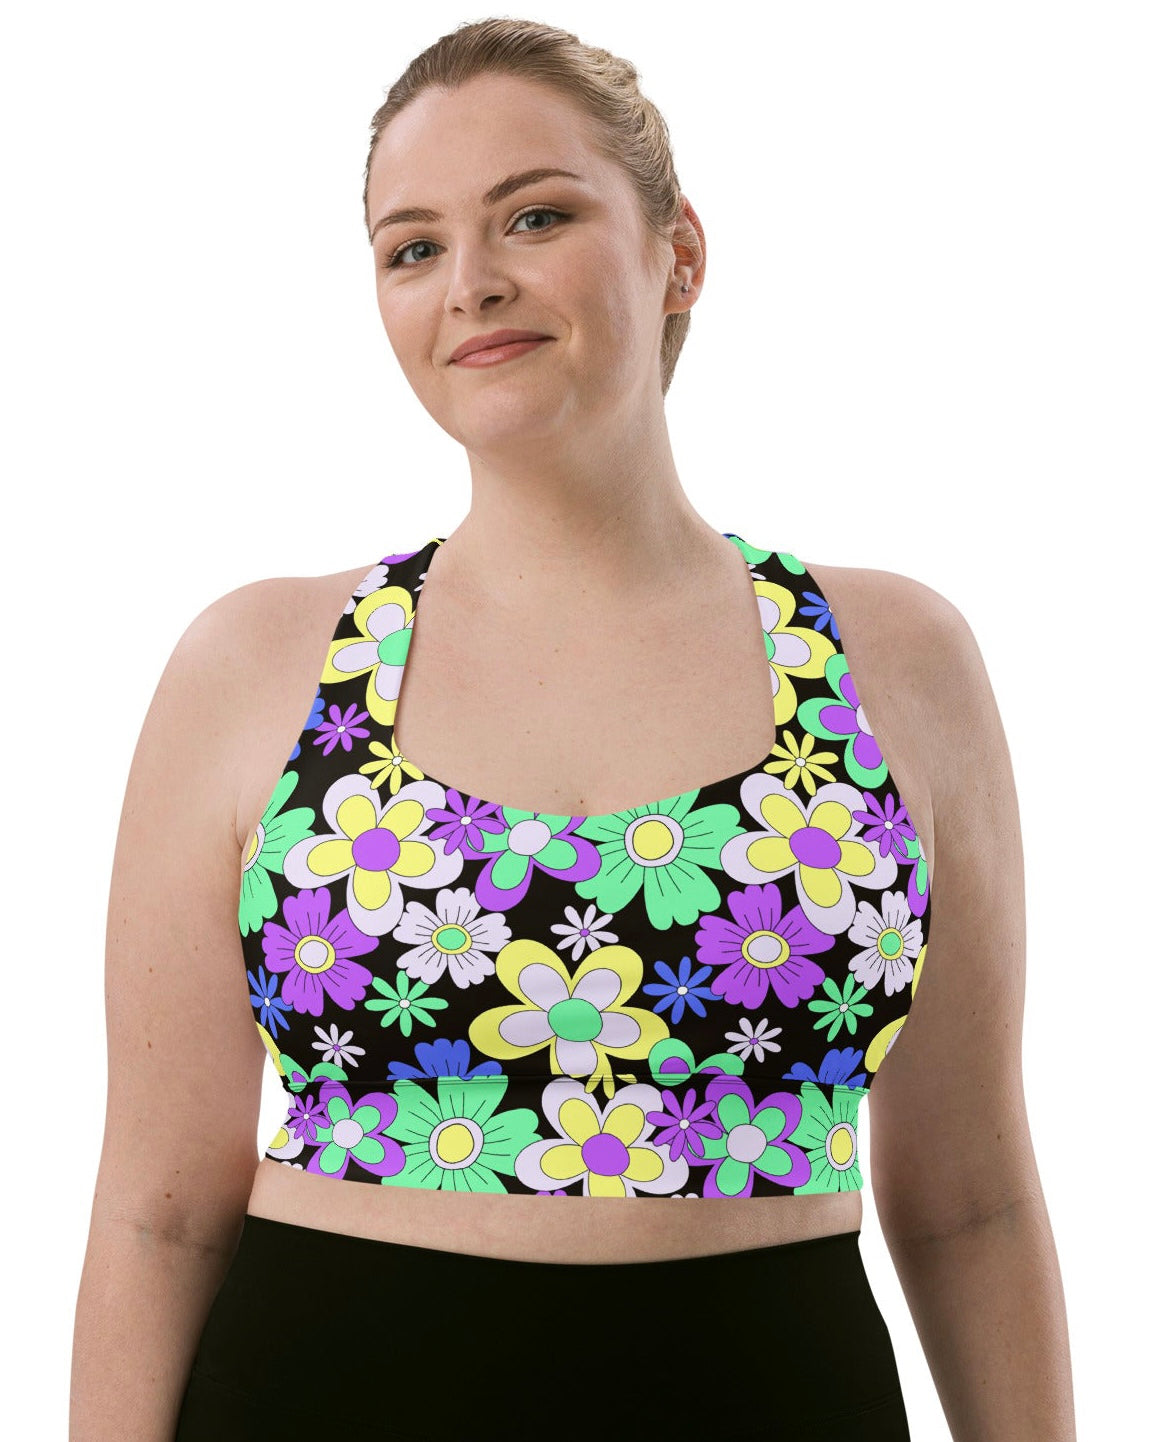 Crazy Daisy Longline Top, Sports Top, - One Stop Rave